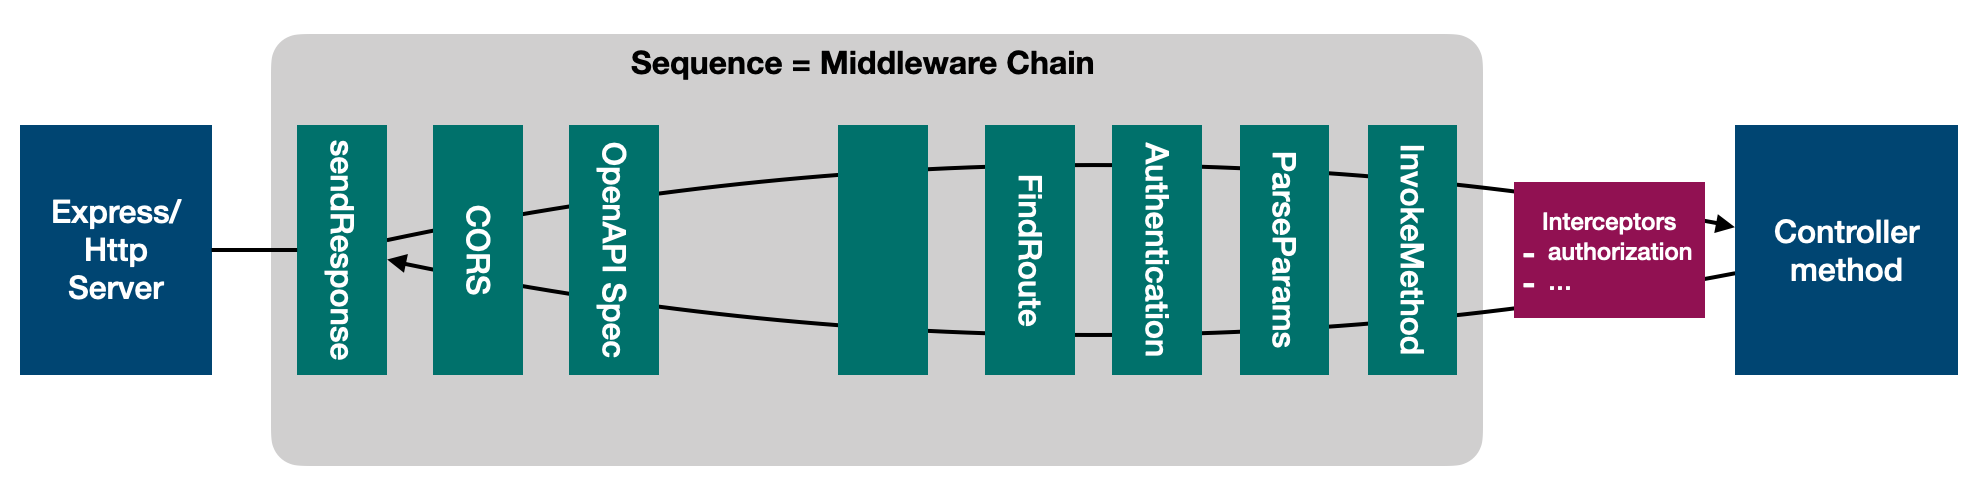 middleware-sequence